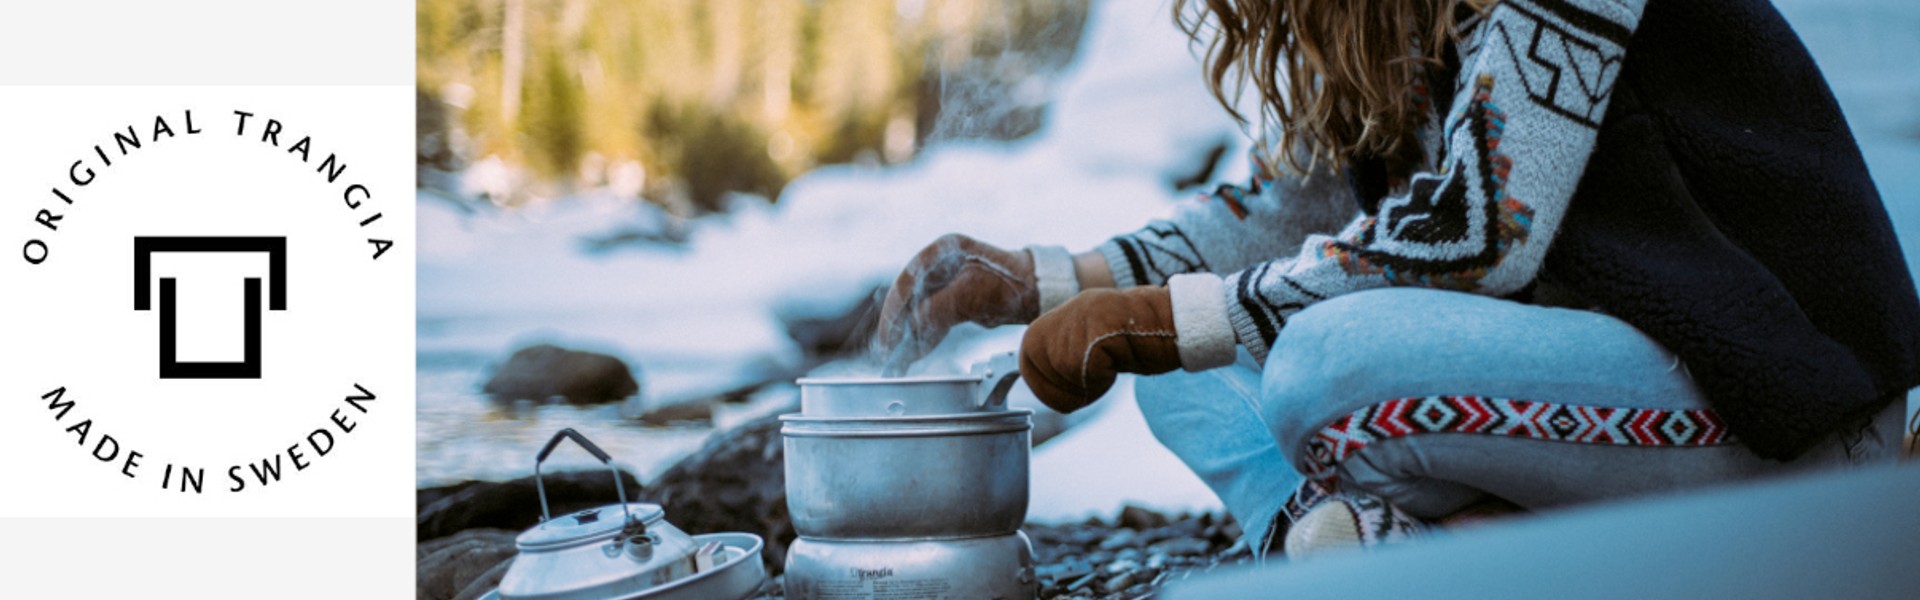 Trangia (Sweden) - Durable and energy-efficient equipment for the field kitchen